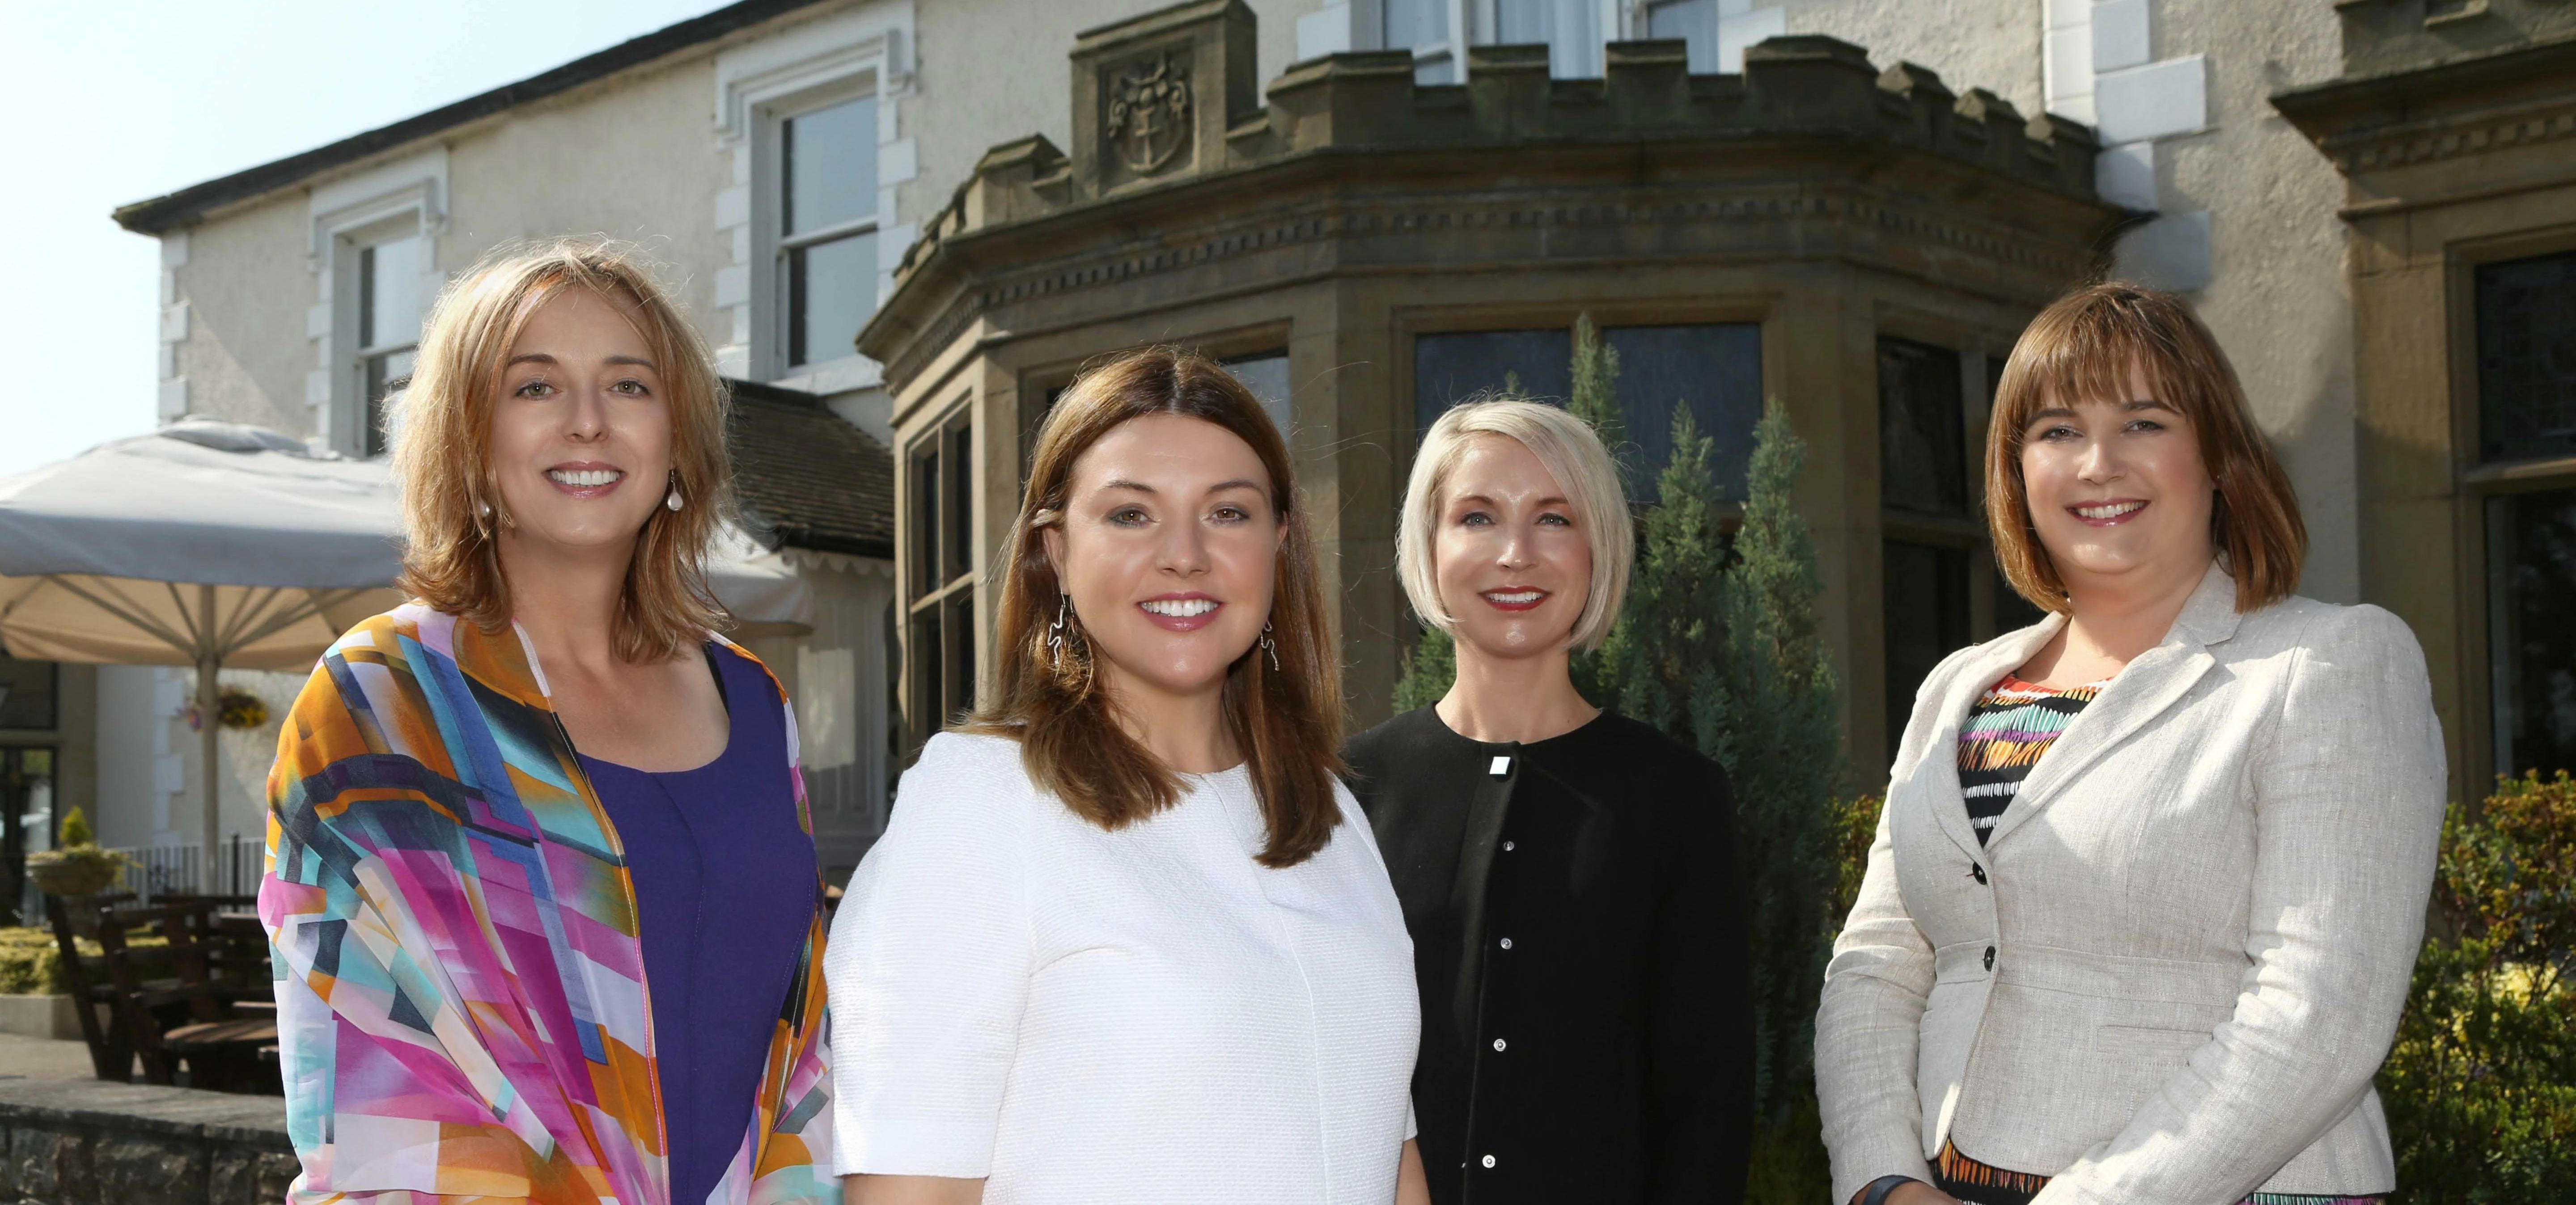 Tracy North, Carole Green, Helen Watson and Emma Watkins at the event. 